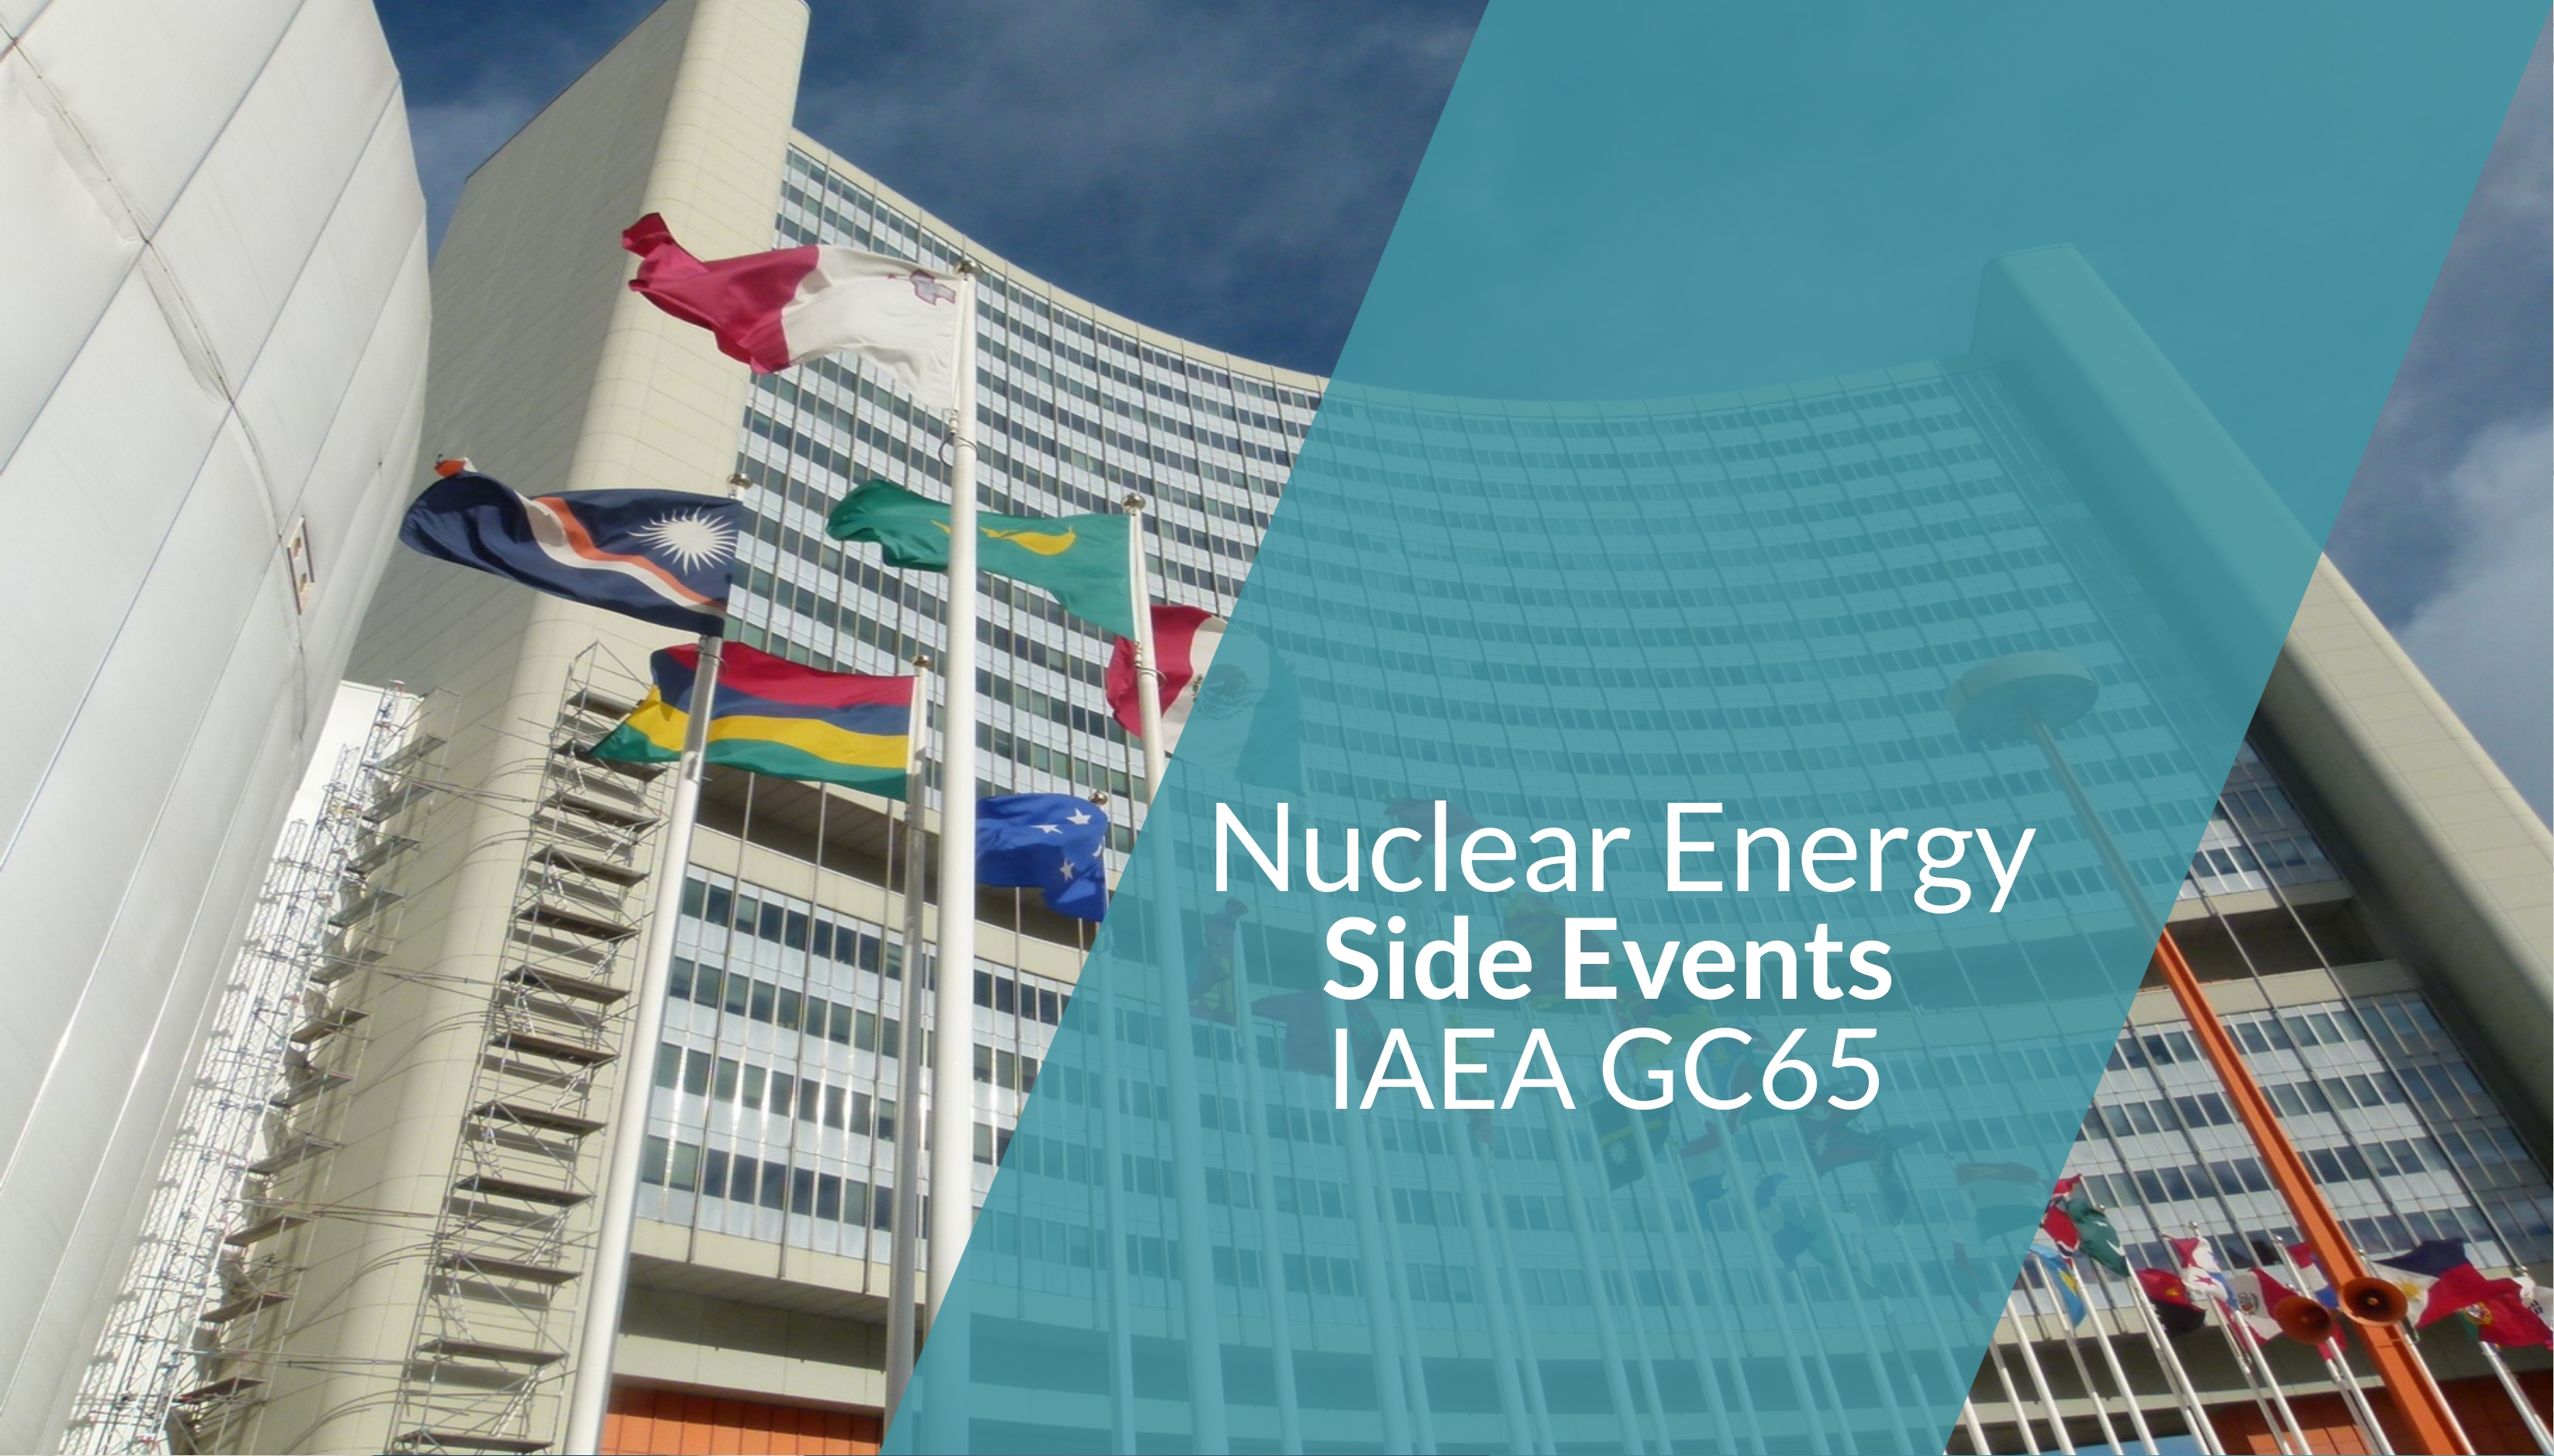 Nuclear Energy Side Events at the 65th IAEA General Conference | IAEA